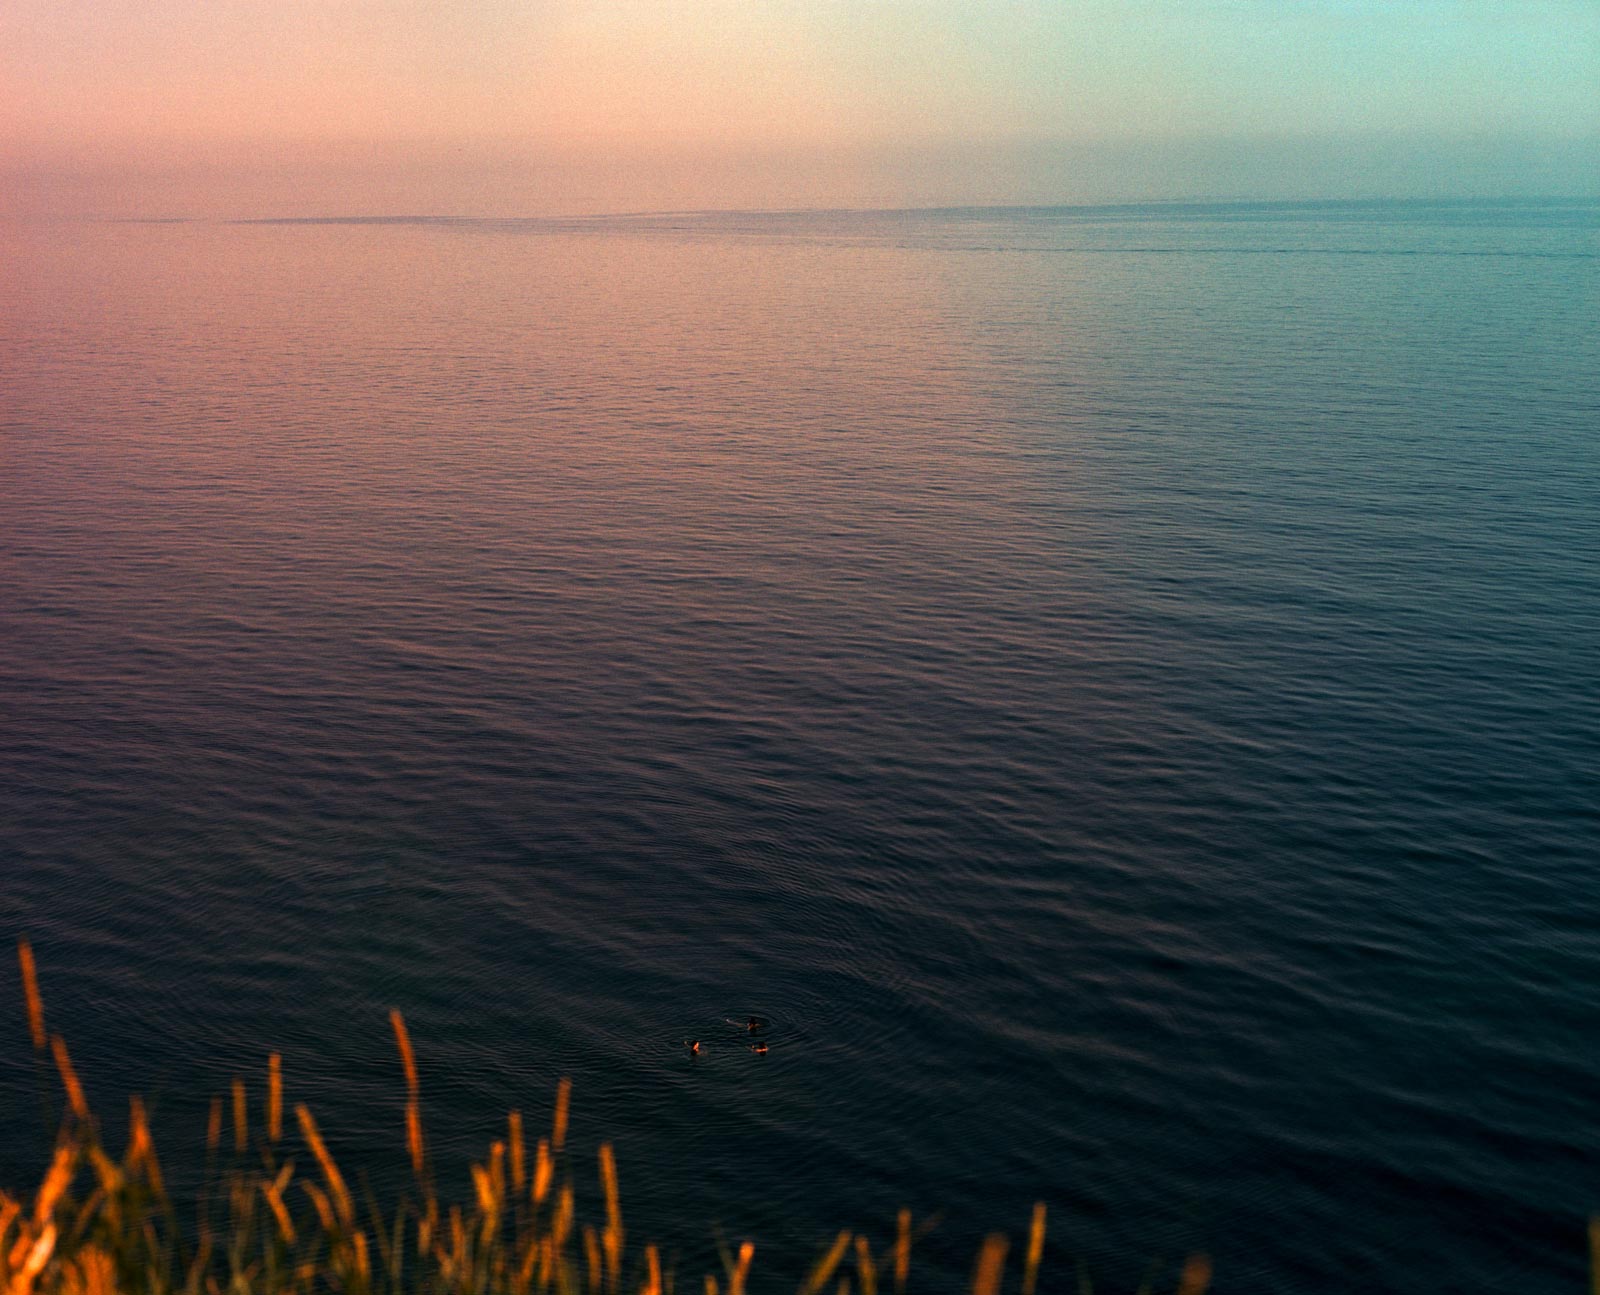 Look closely, people swimming at sunset, analogue photography, art.